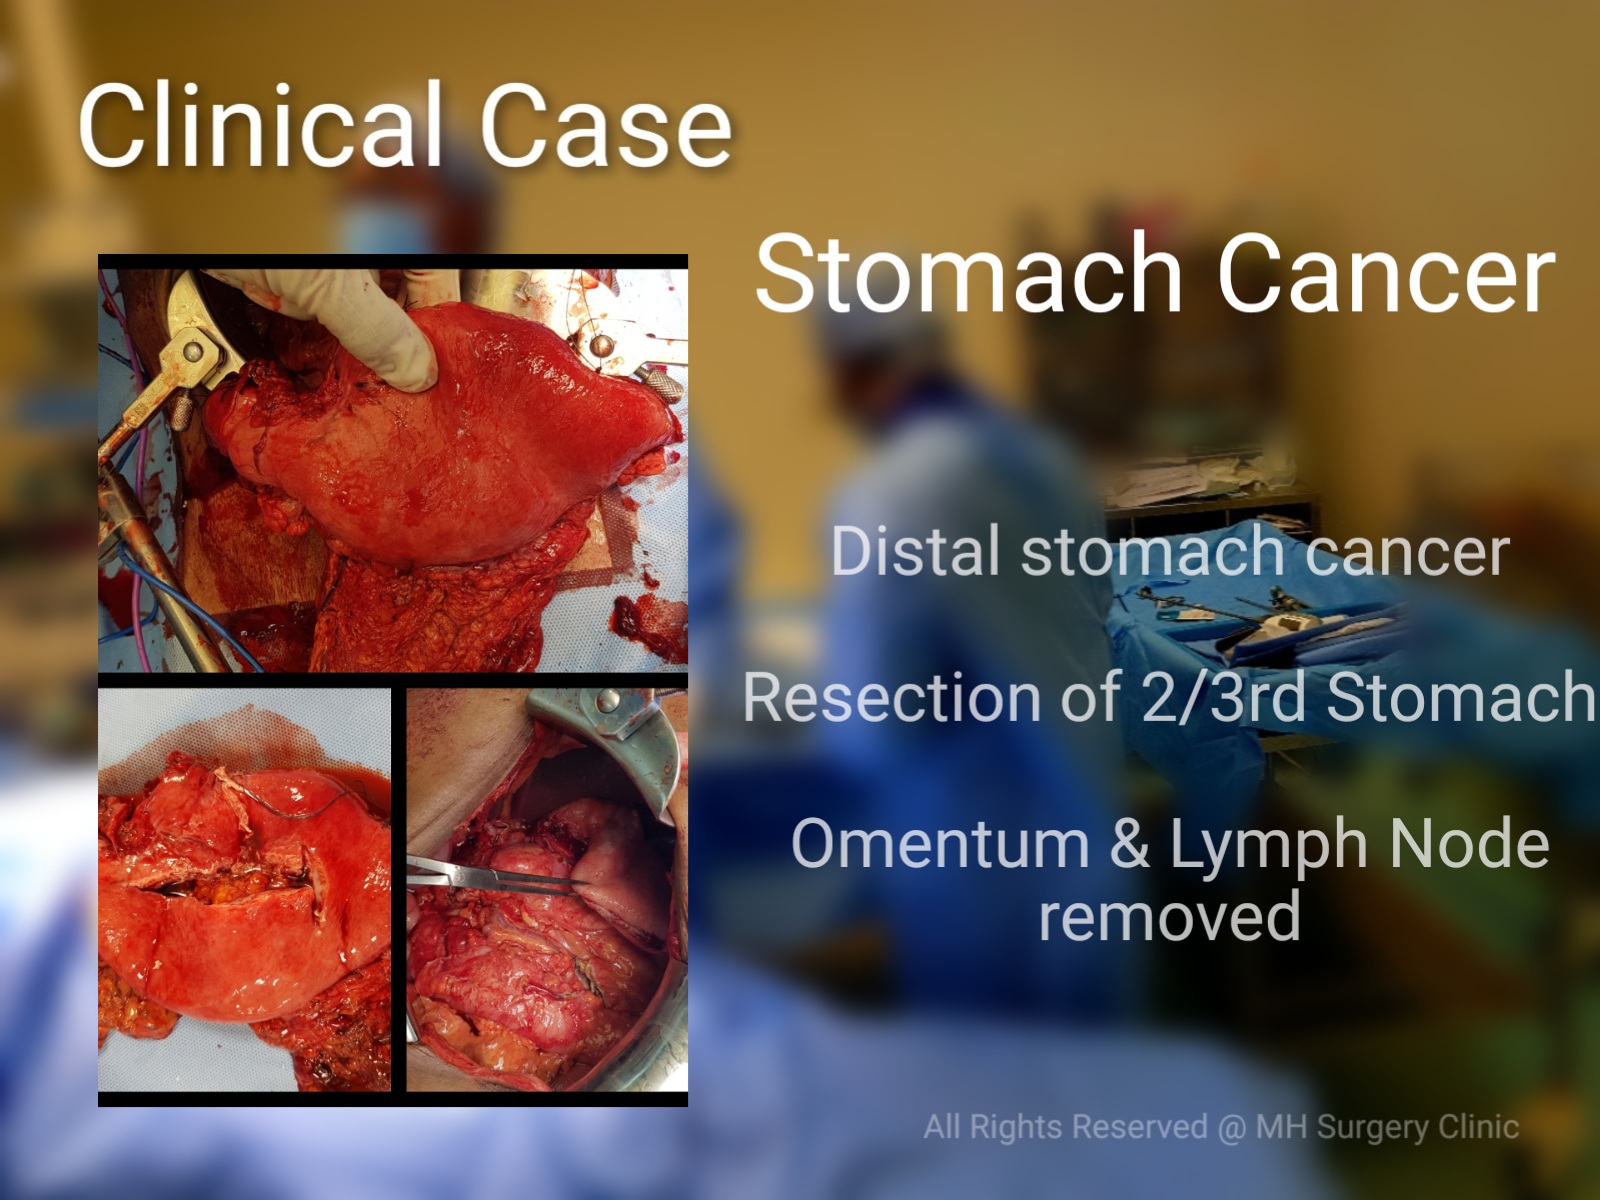 Stomach Cancer: One of the leading causes of death